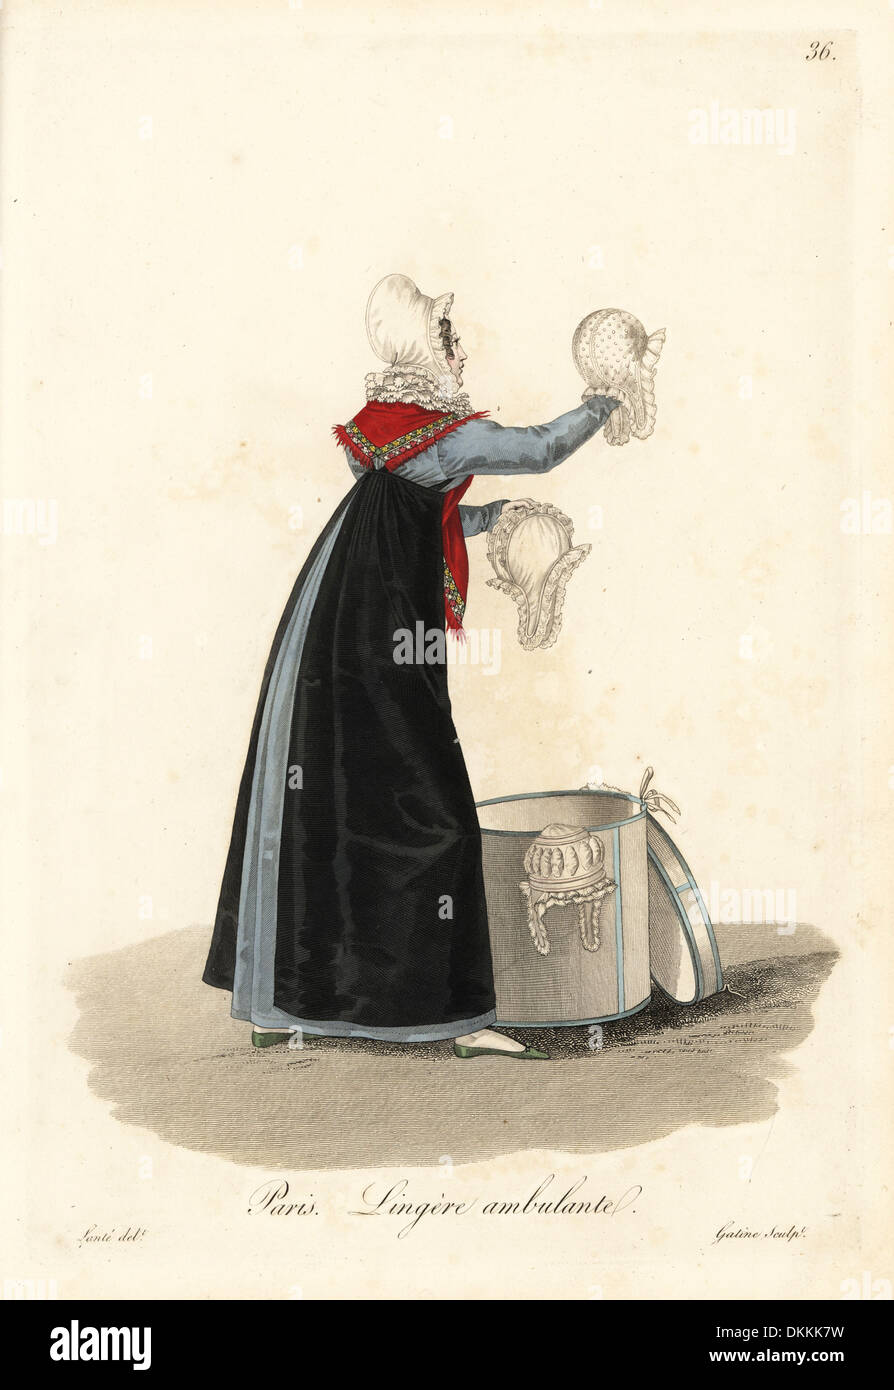 Itinerant seamstress, Paris, early 19thC, selling bonnets from a hat box. Stock Photo